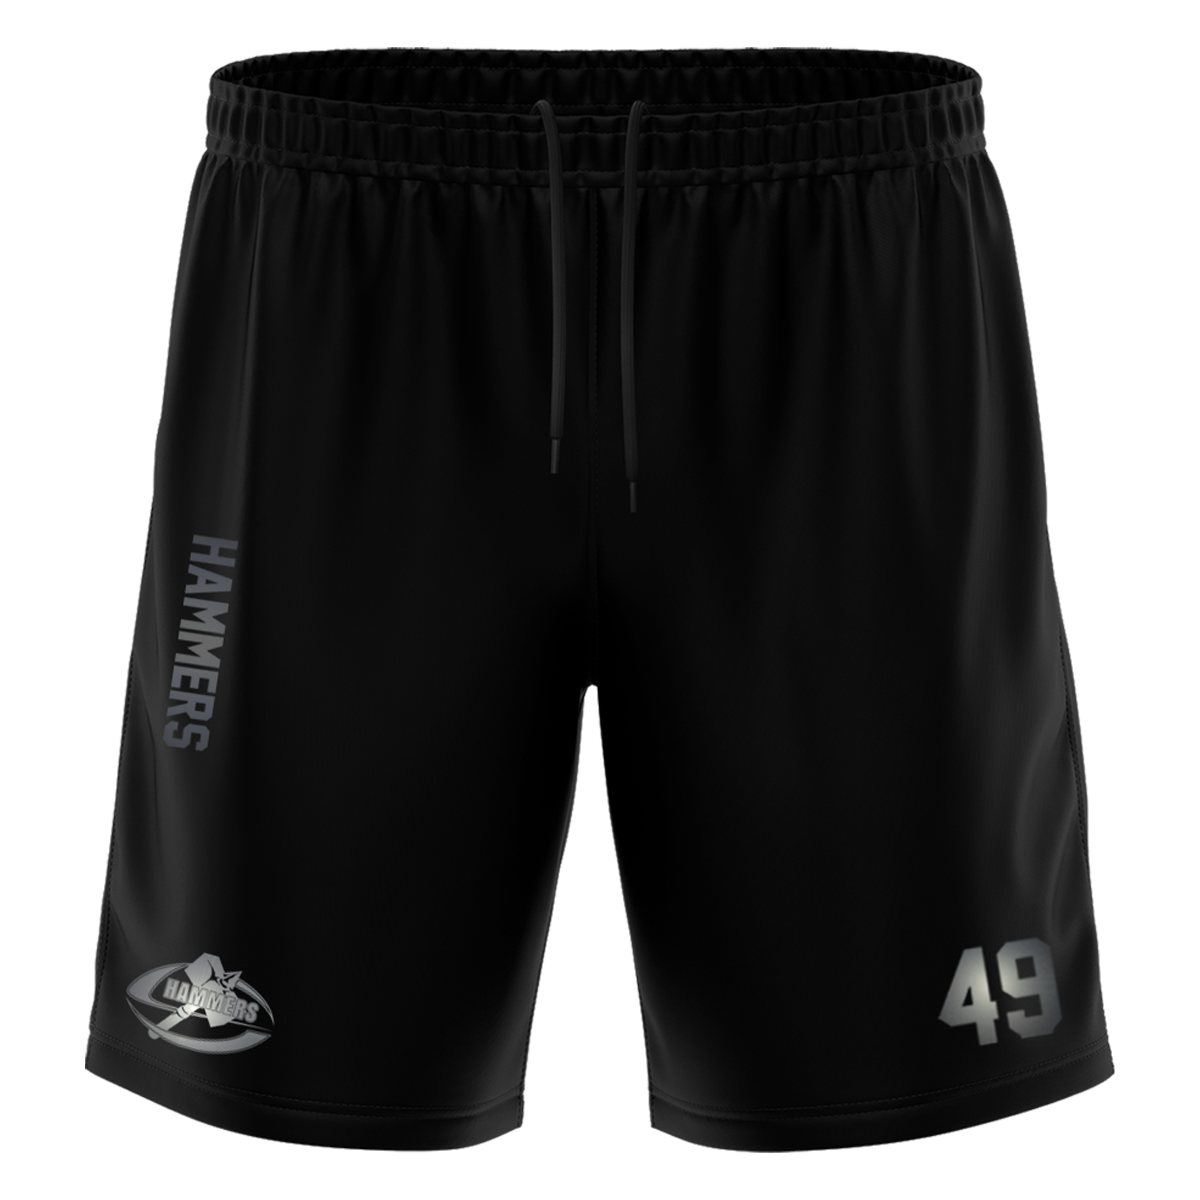 S-Hammers "Blackline" Training Short with Playernumber or Initials